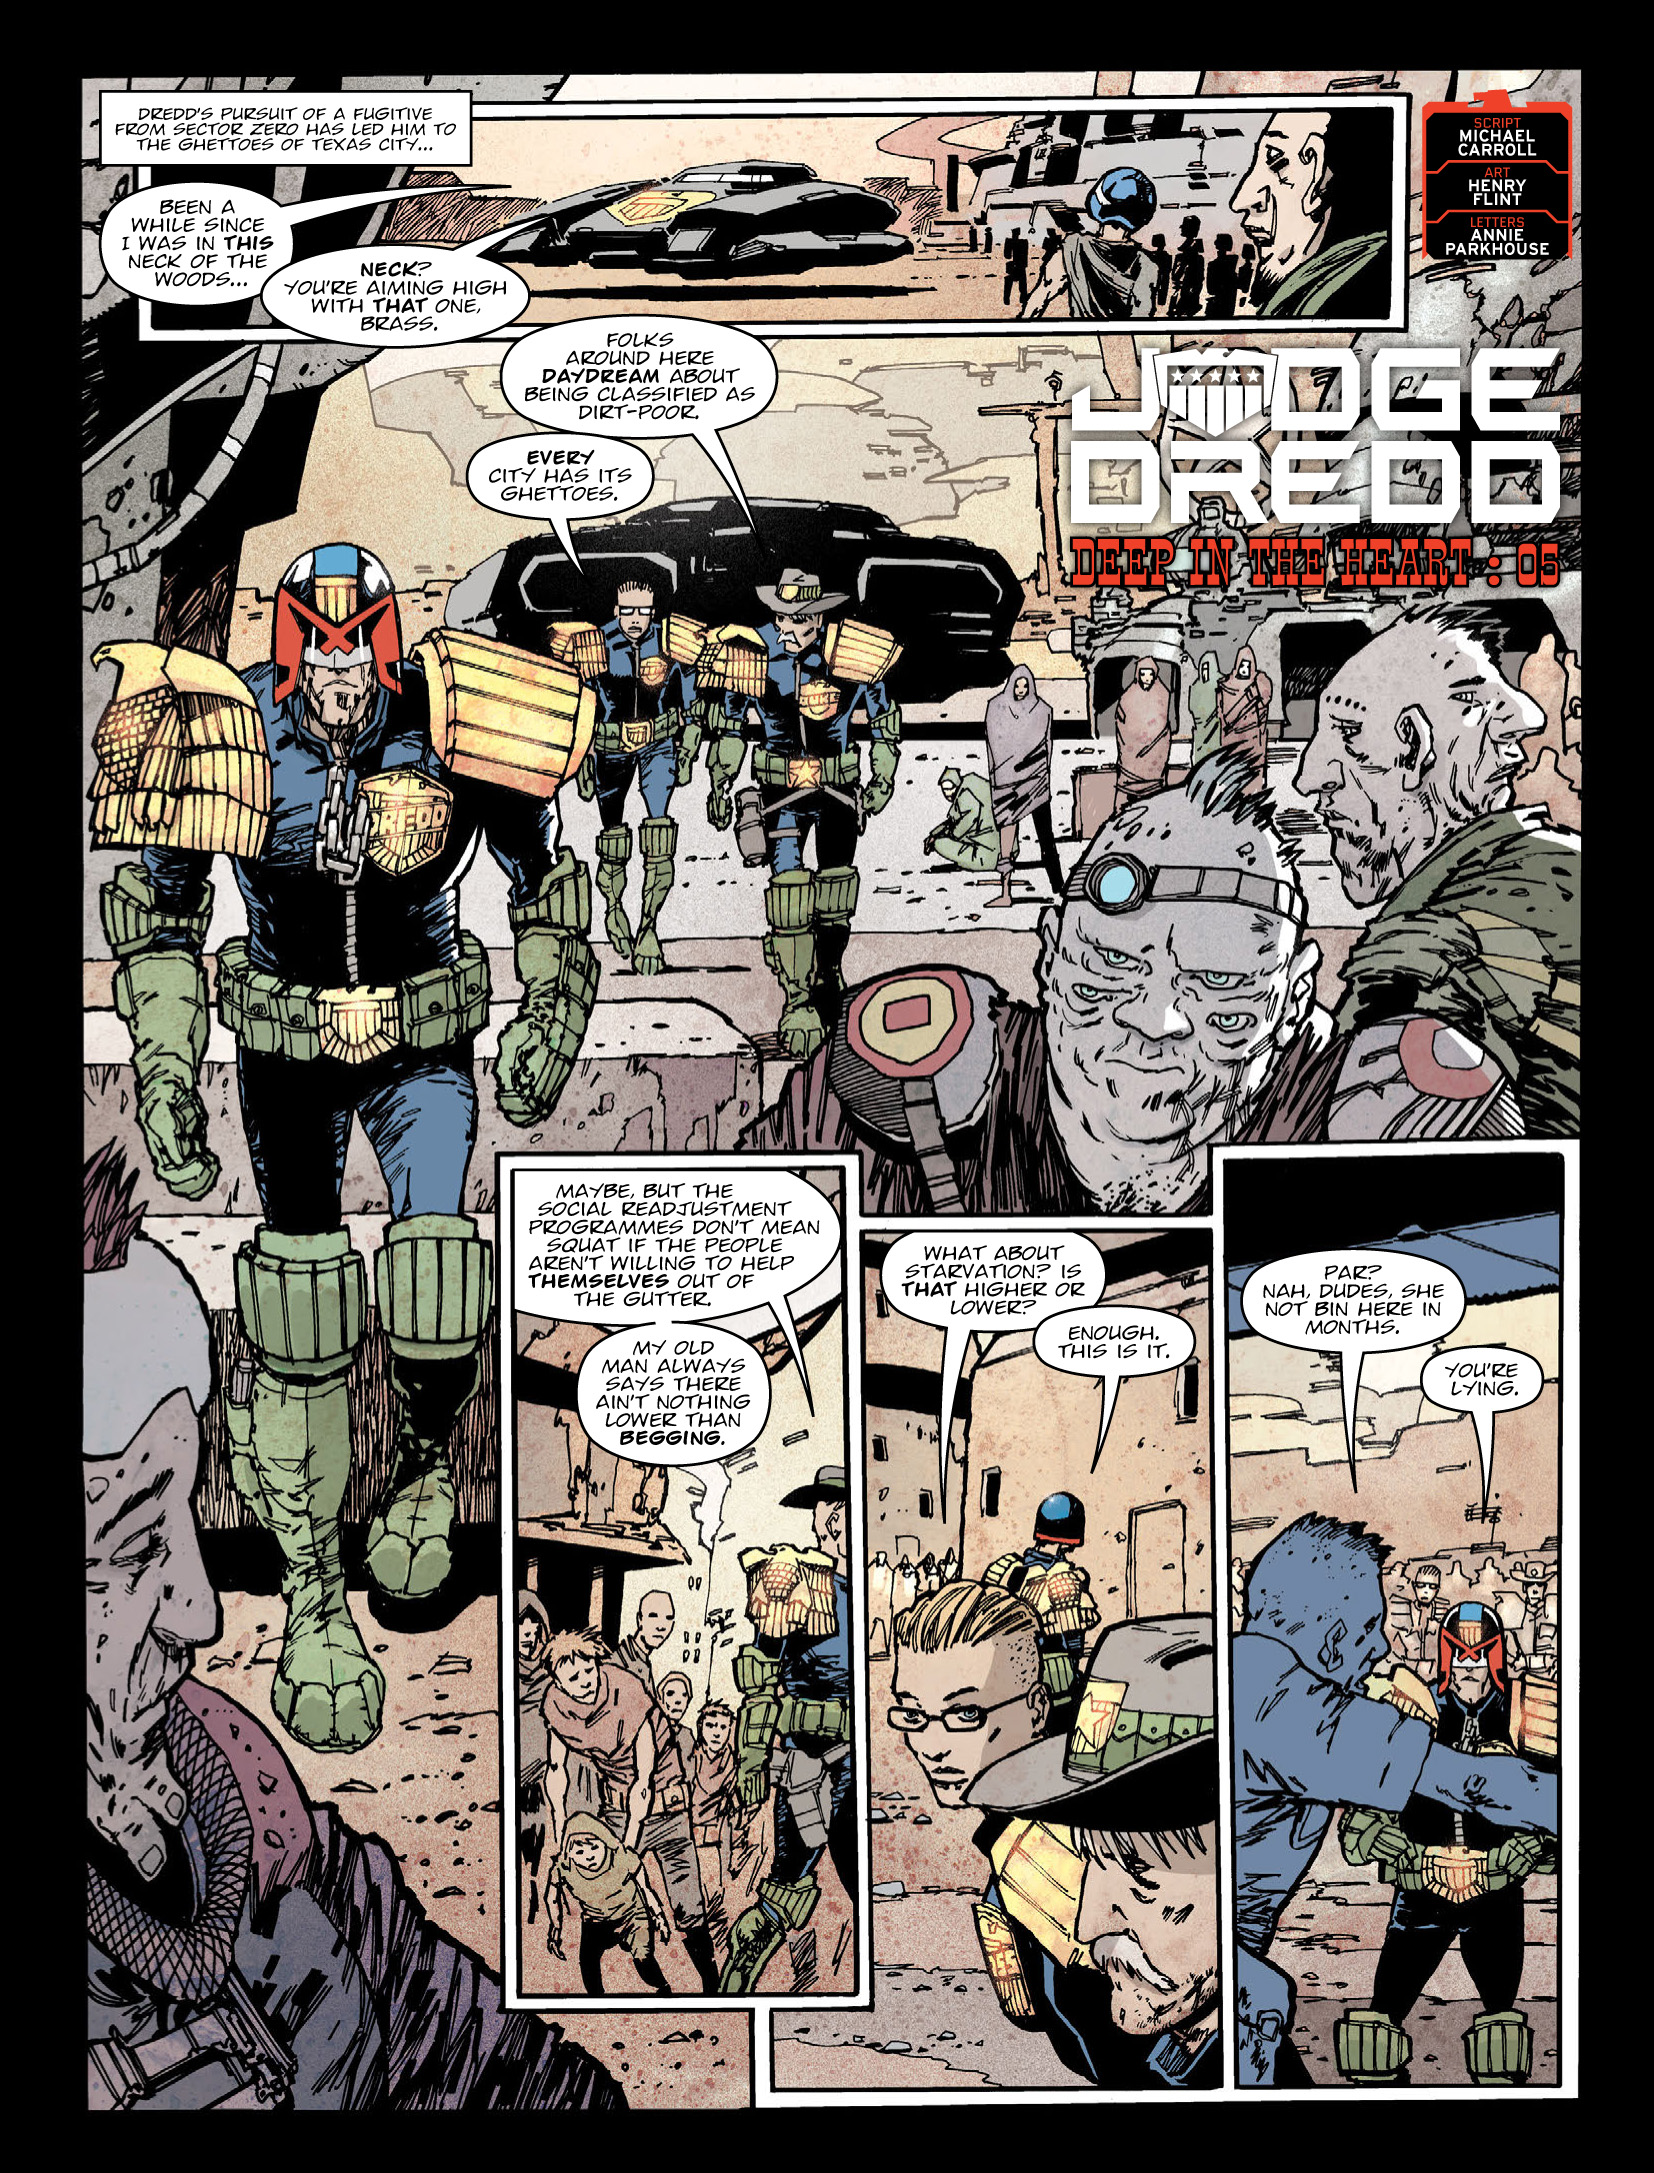 2000 AD: Chapter 2016 - Page 3